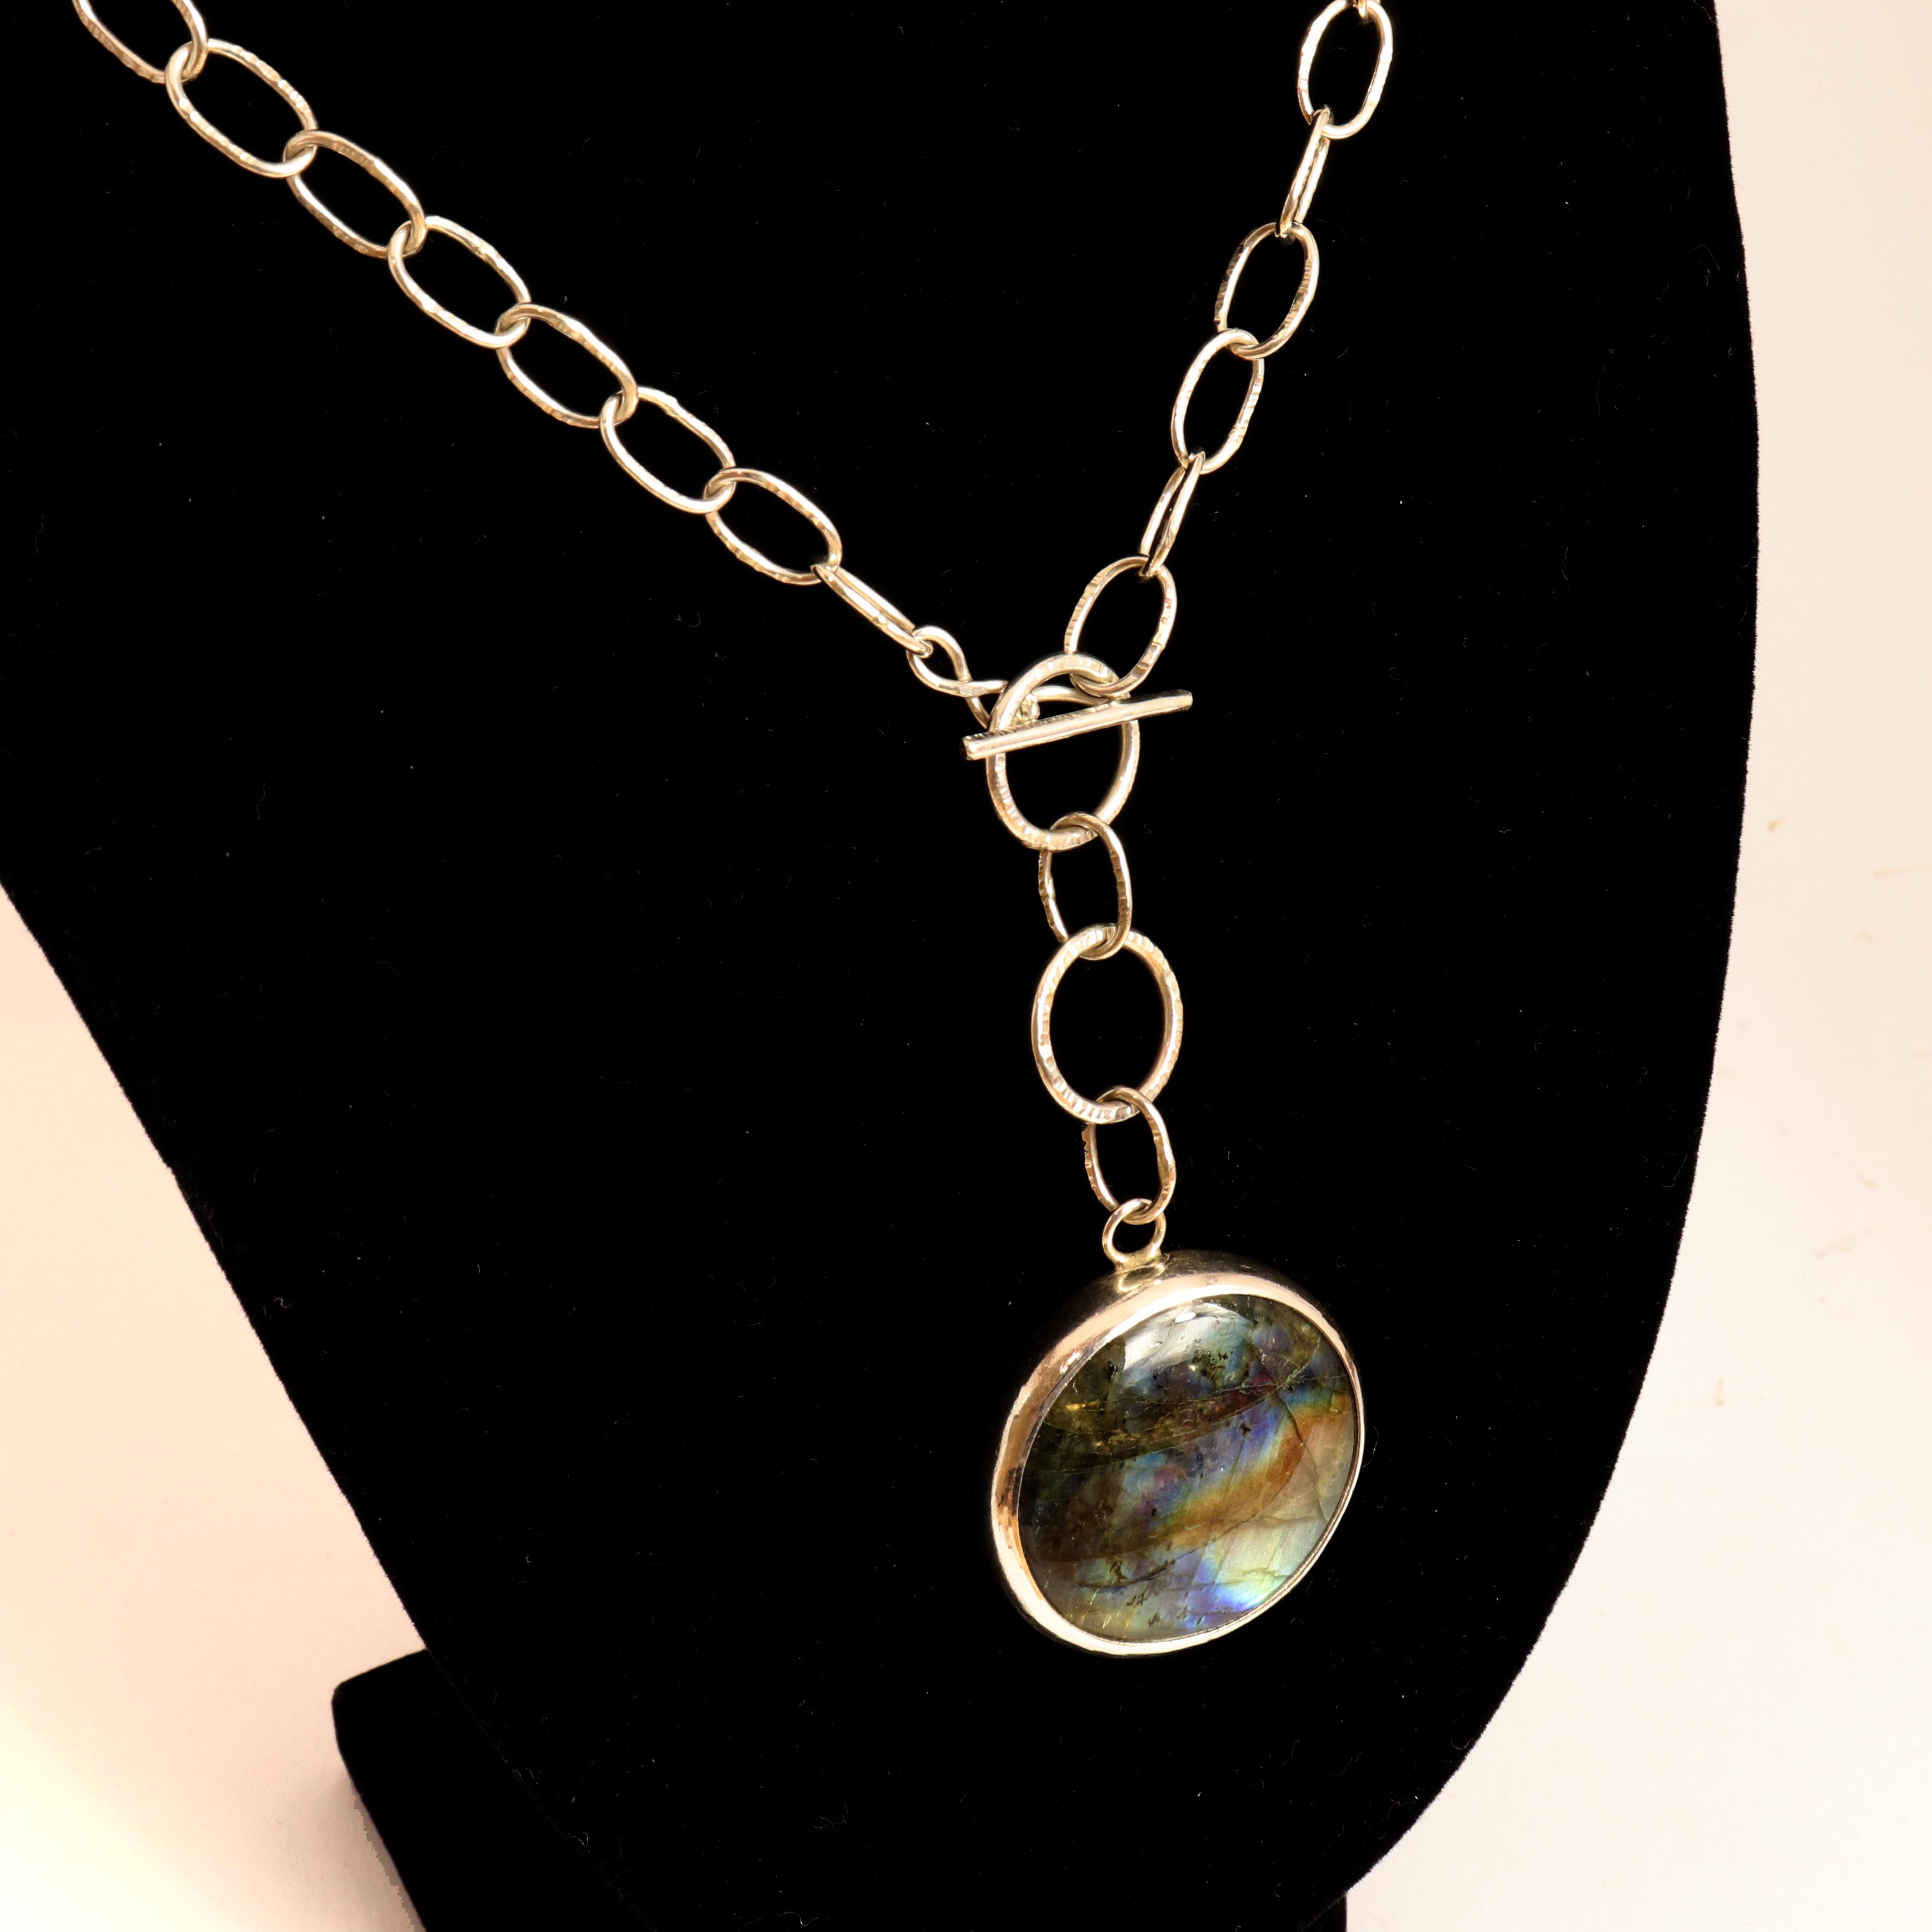 Large Labradorite With Handmade Oval Chain Necklace